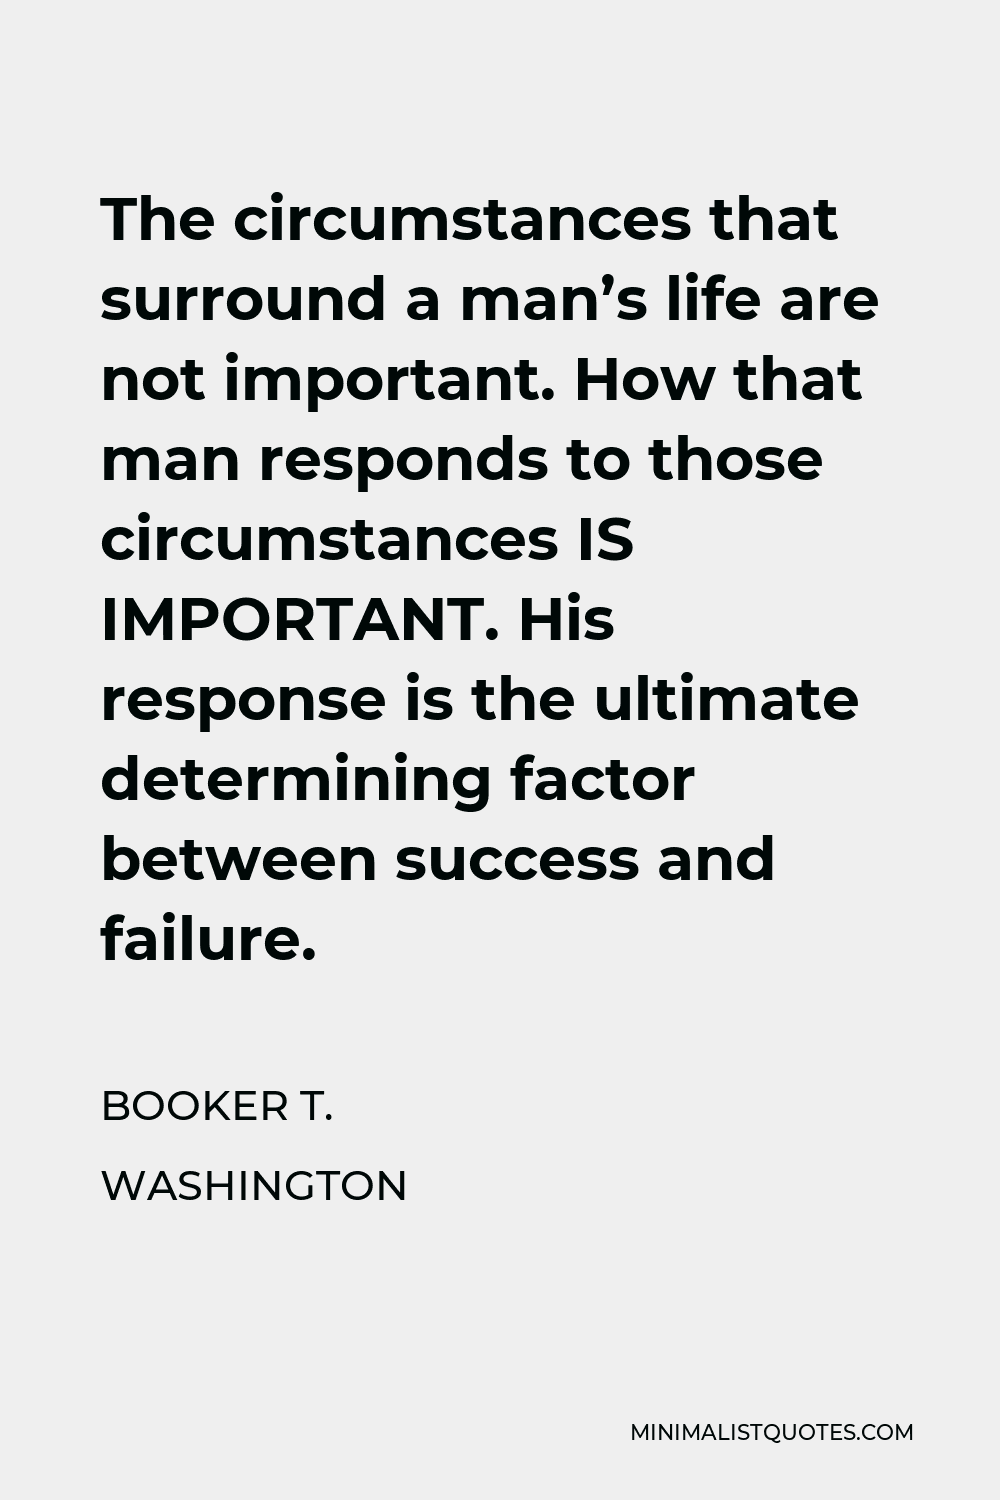 Booker T. Washington Quote - The circumstances that surround a man’s life are not important. How that man responds to those circumstances IS IMPORTANT. His response is the ultimate determining factor between success and failure.